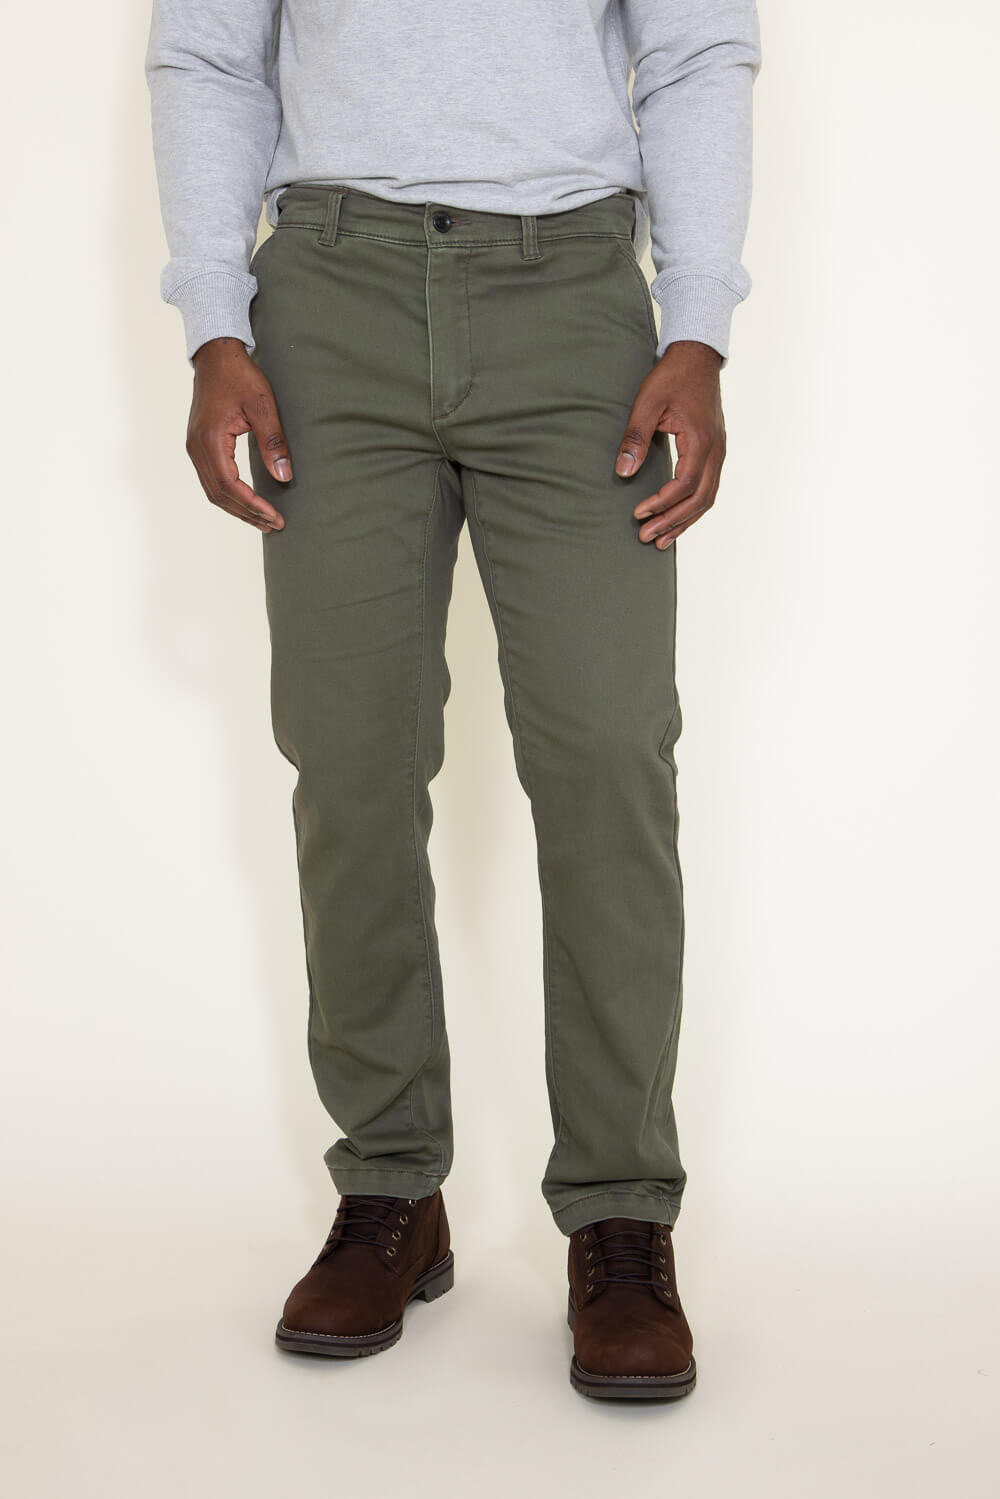 CEO Chino Five Pocket Cotton Stretch Pants Stone – Collars & Co.